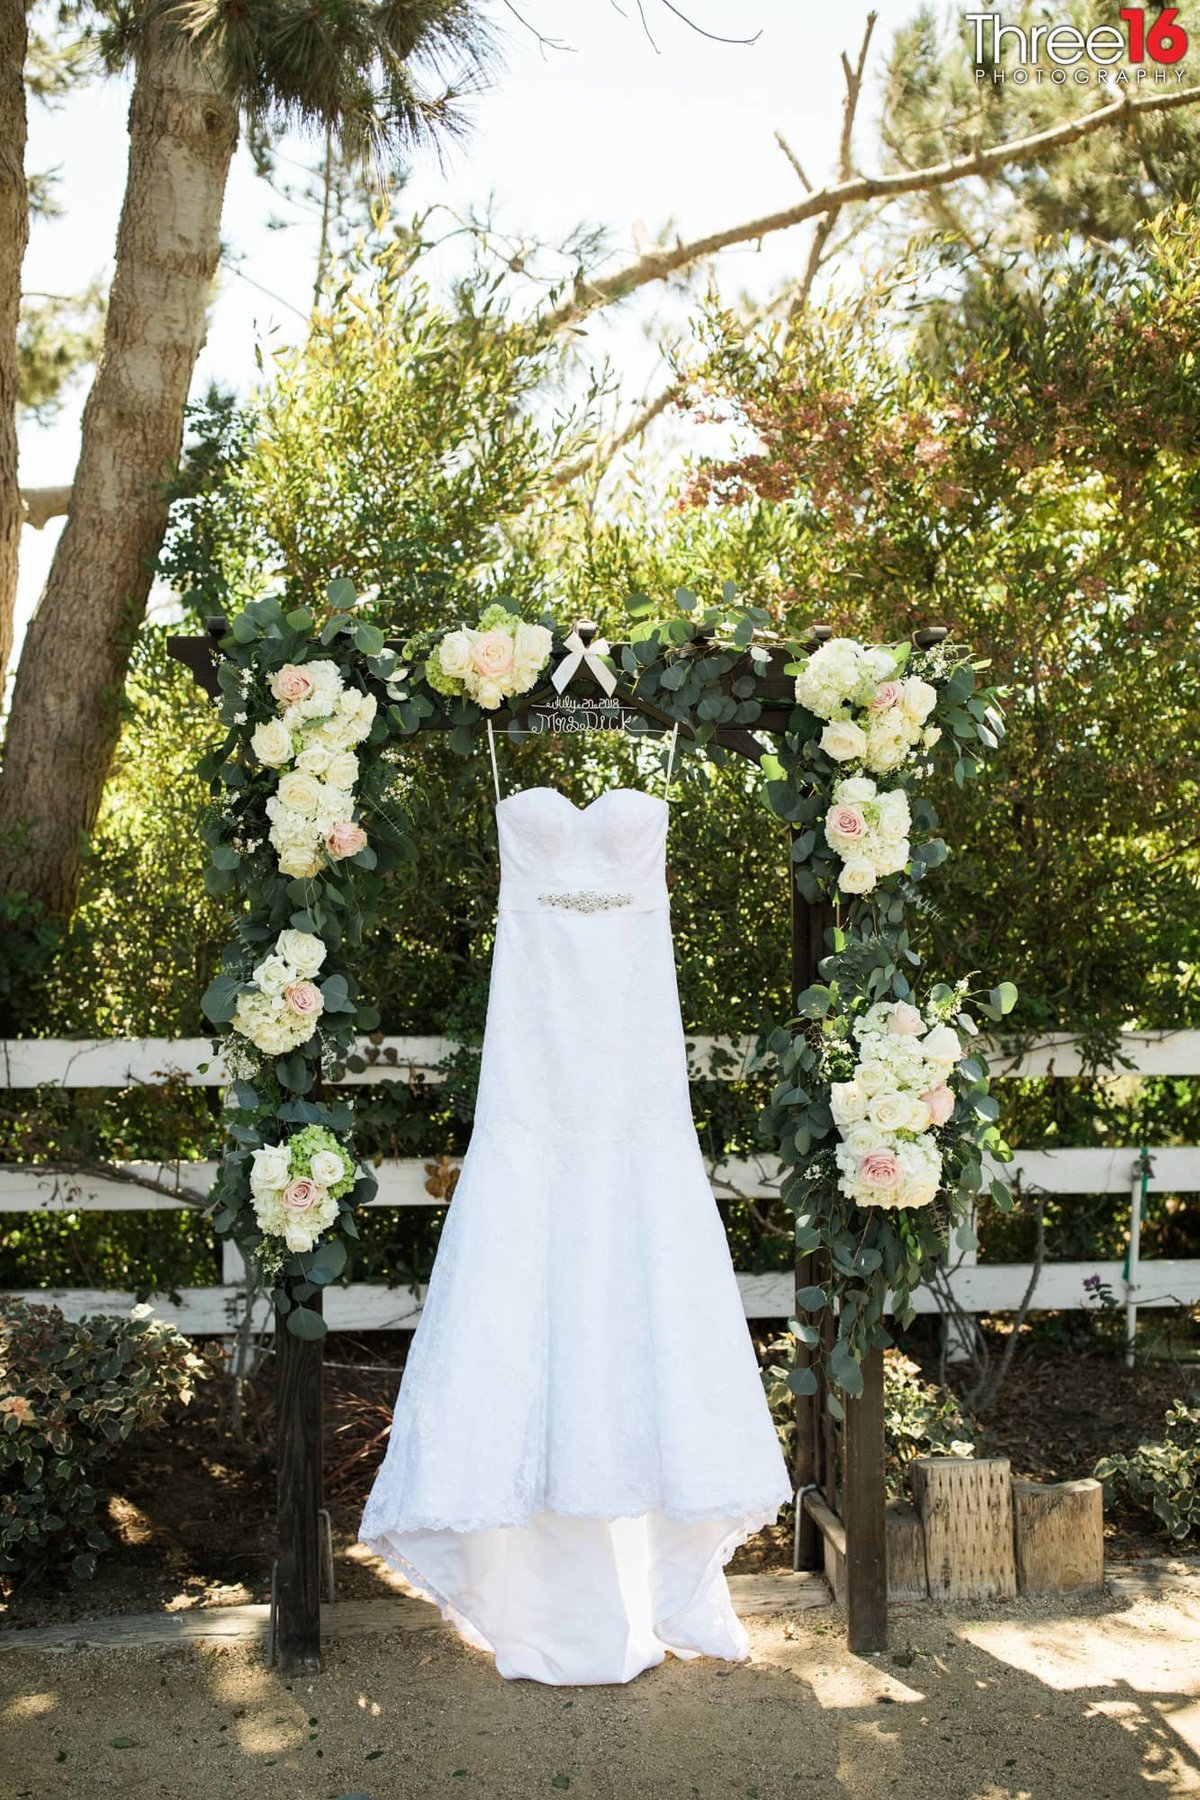 Bride's wedding dress hangs from a floral archway